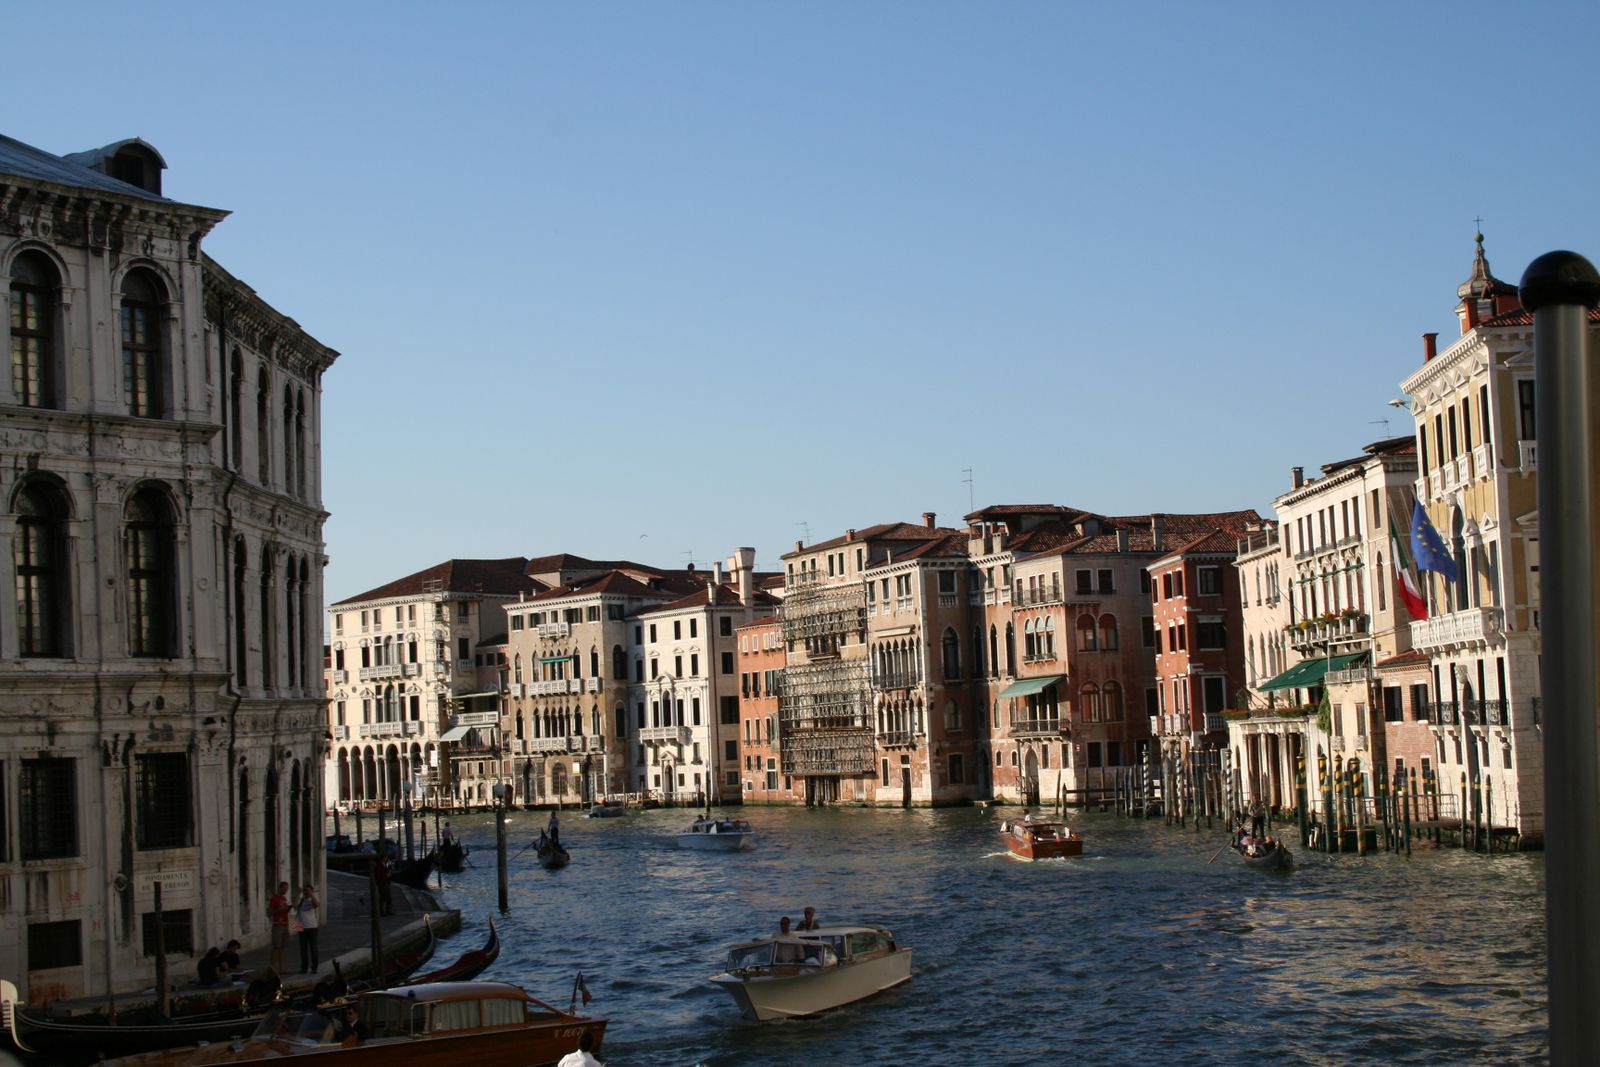 A canal from the iconic town of Venice, Italy